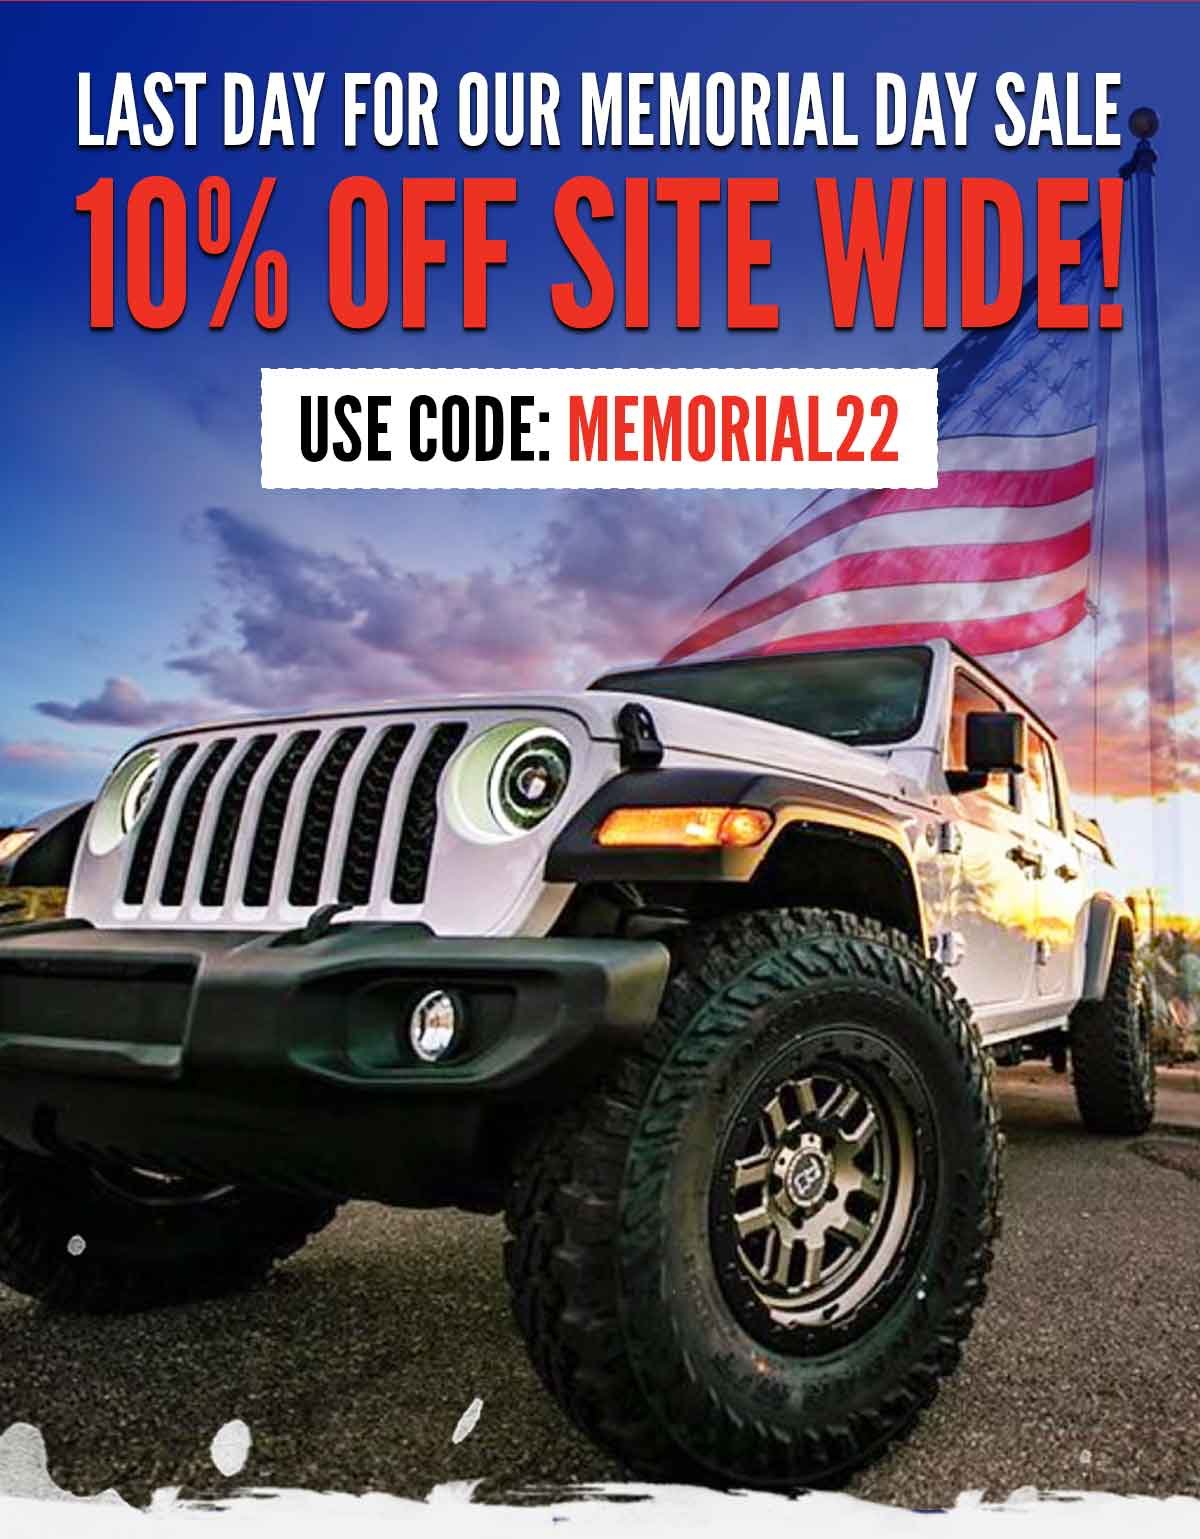 Last Day For Our Memorial Day Sale 10% Off Site Wide! Use Code: MDAY22